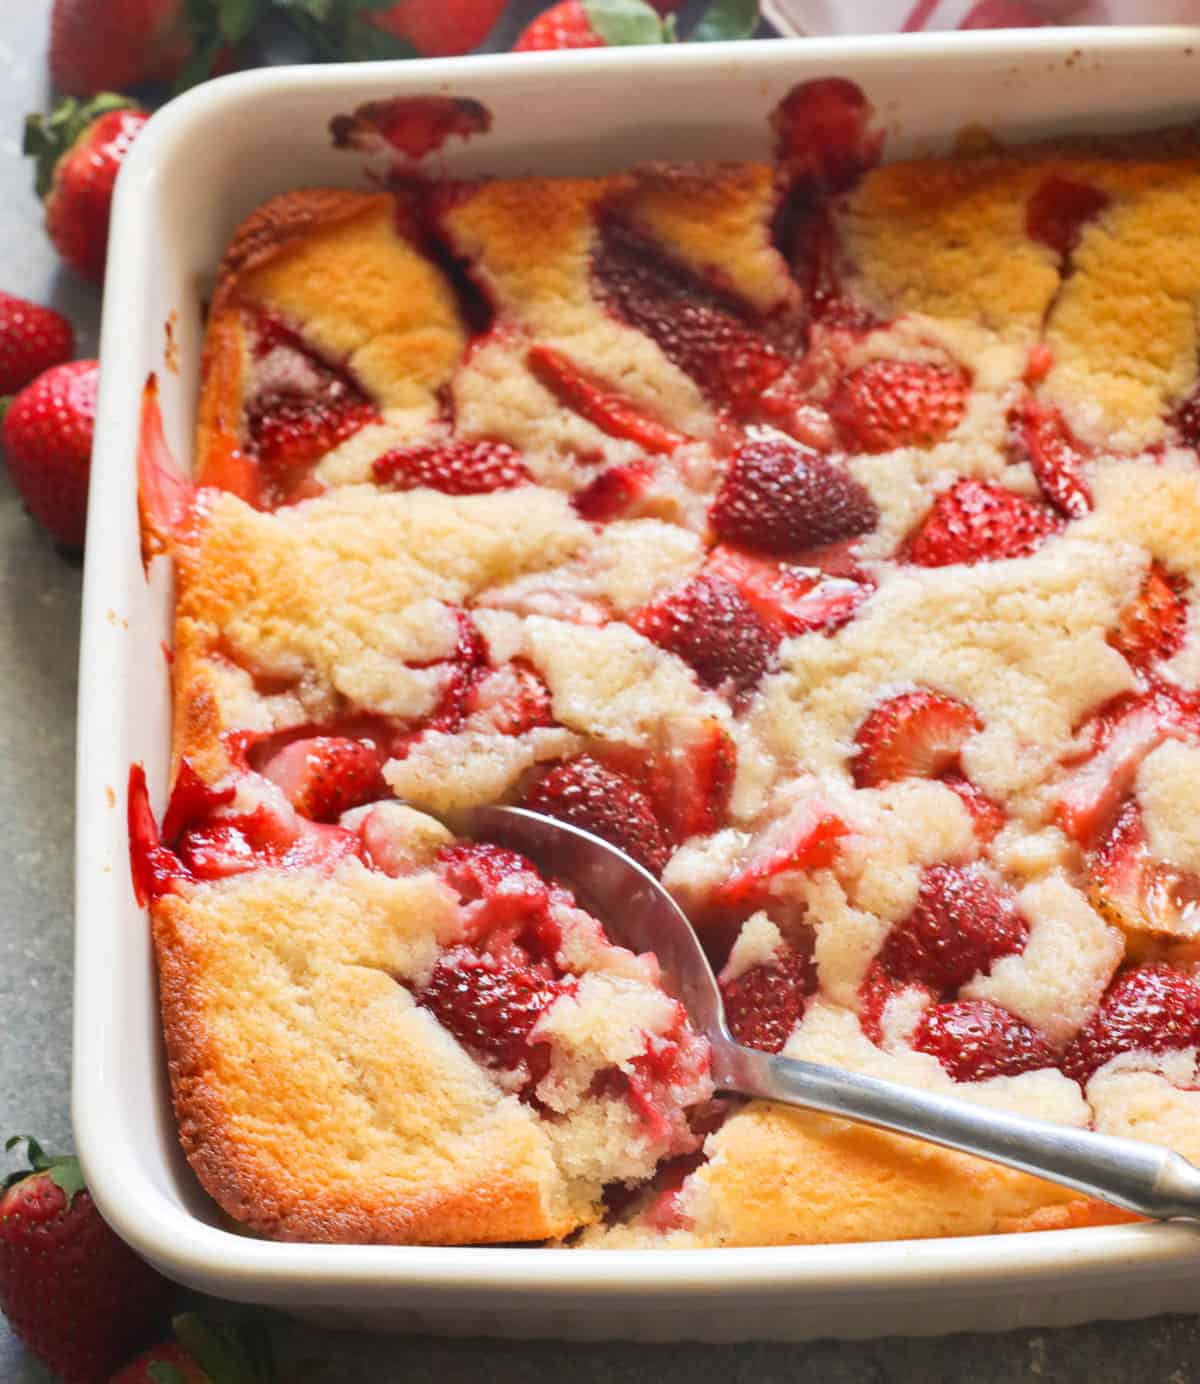 Serving up summertime fun with strawberry cobbler